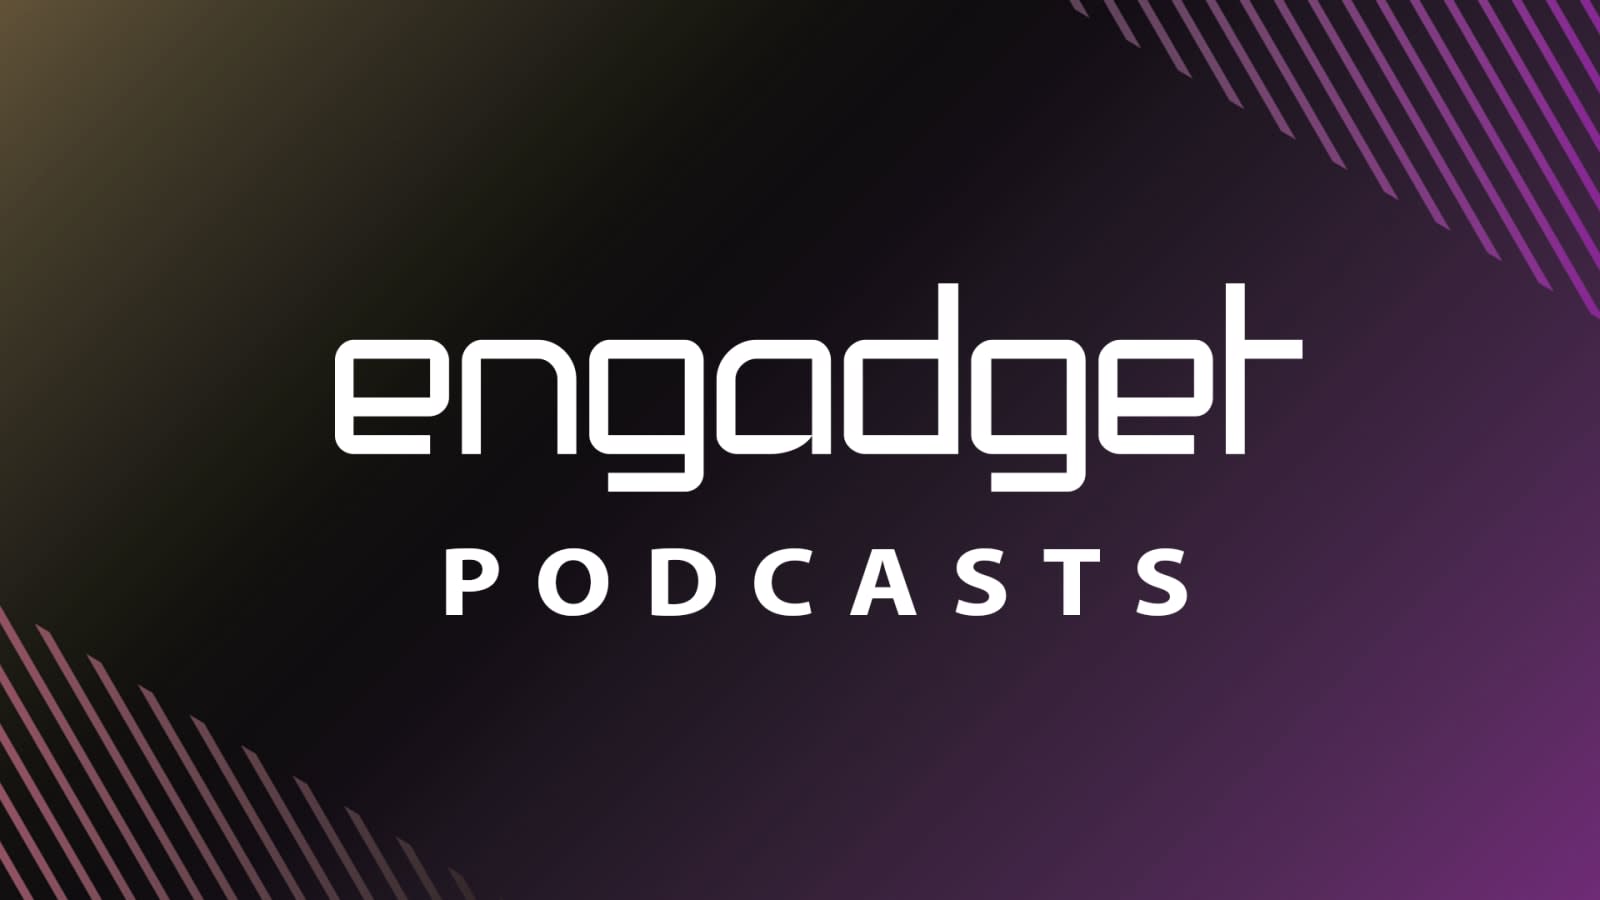 Engadget Podcasts